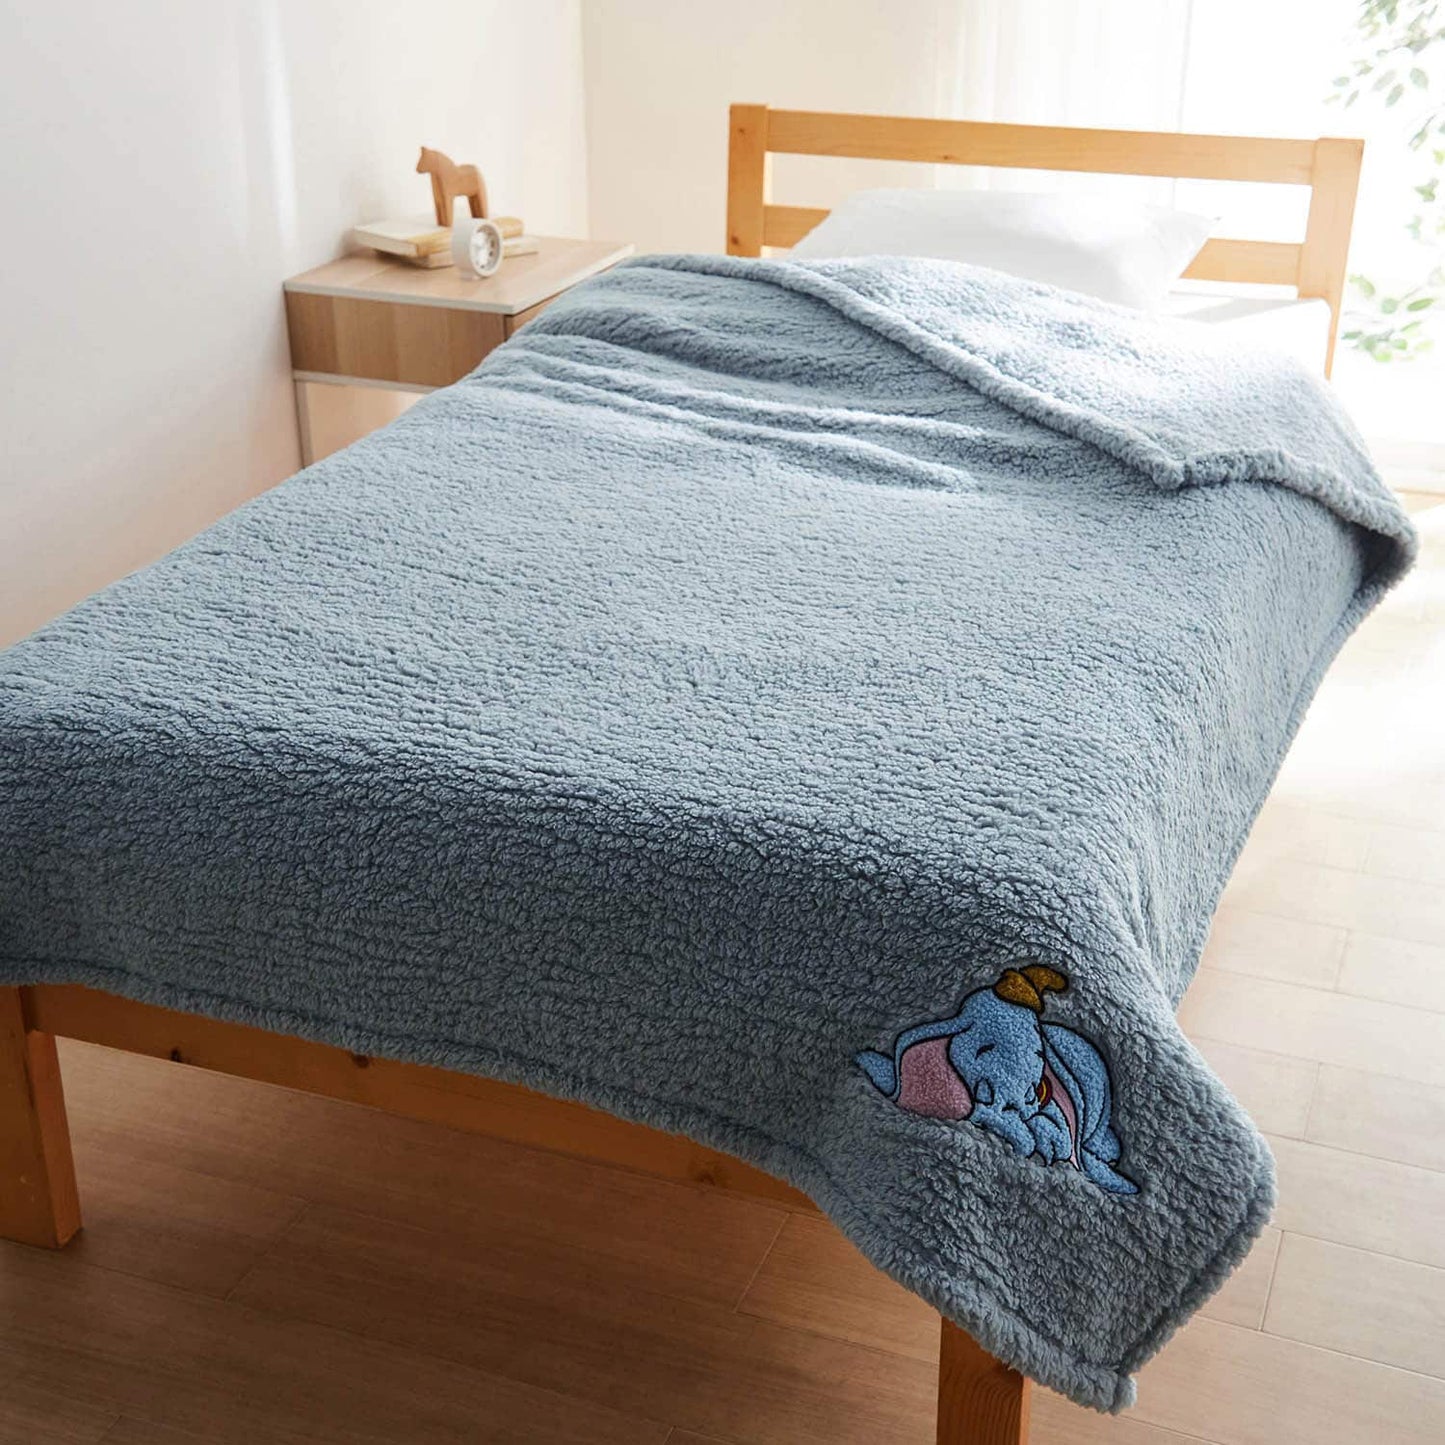 DISNEY Fluffy towel quilt with three embroidery patterns, width 140×length 190cm